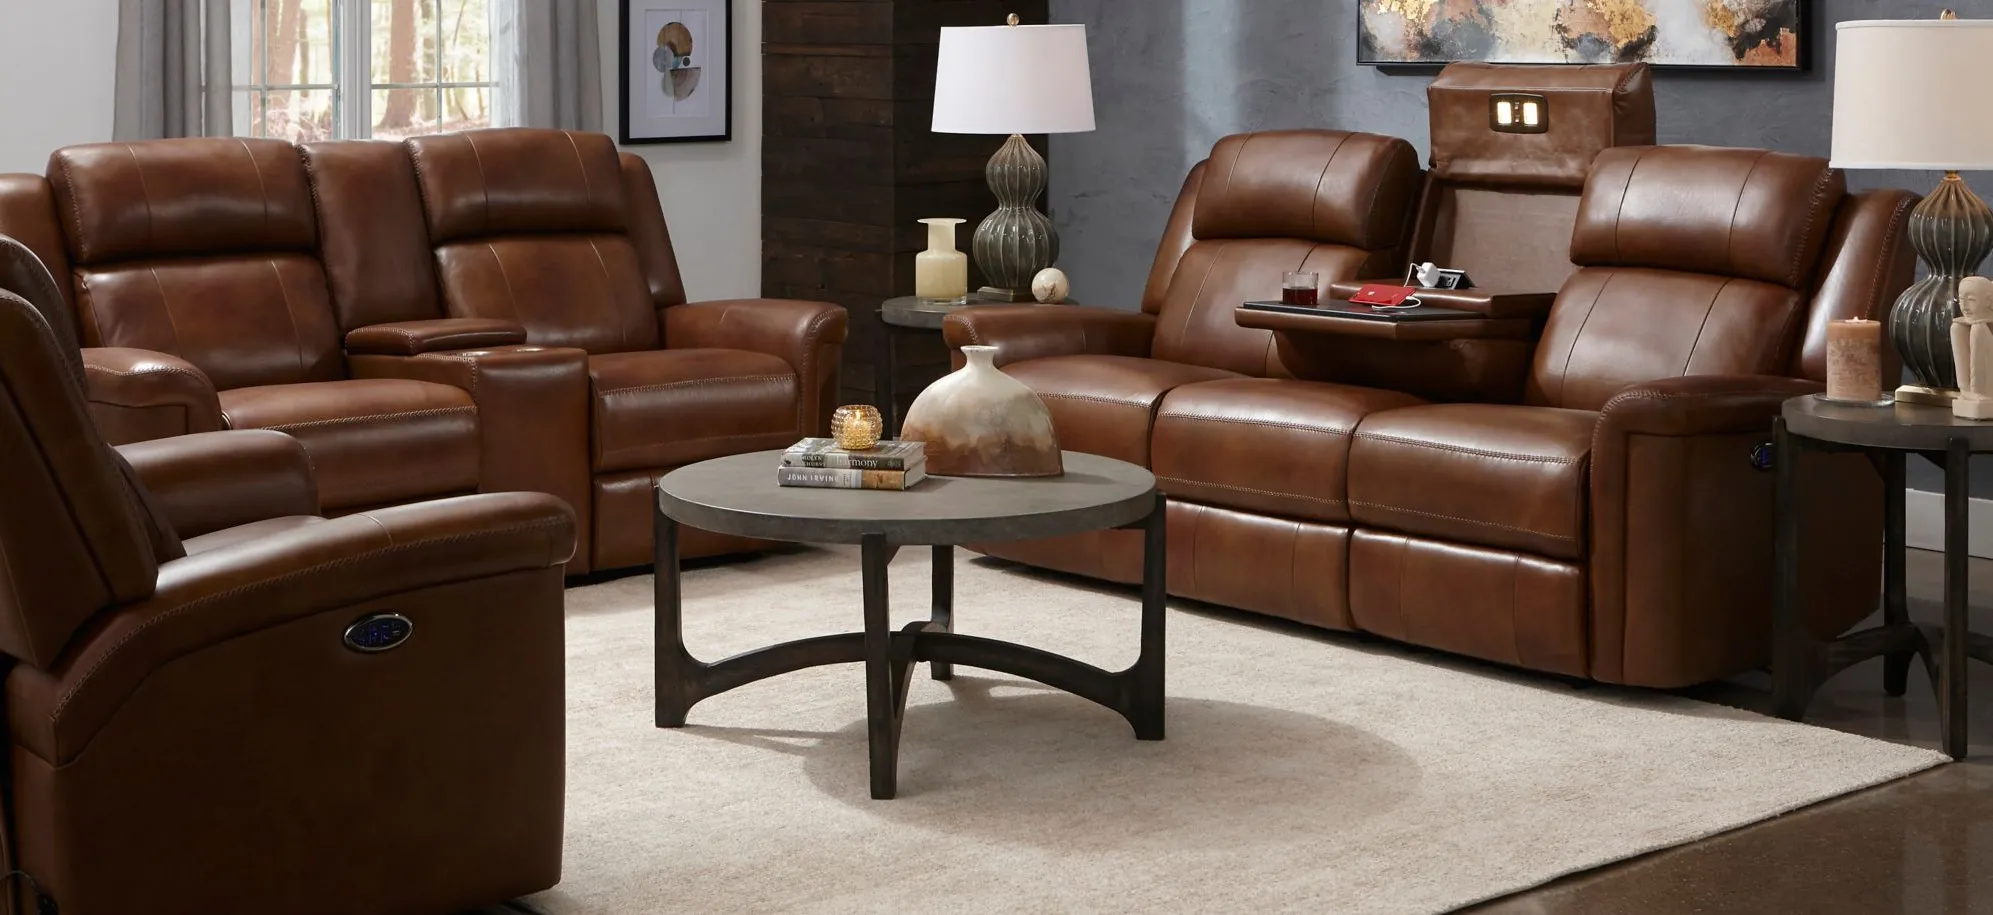 Richfield 2-pc. Leather Power Sofa and Console Loveseat Set in Brown by Bellanest